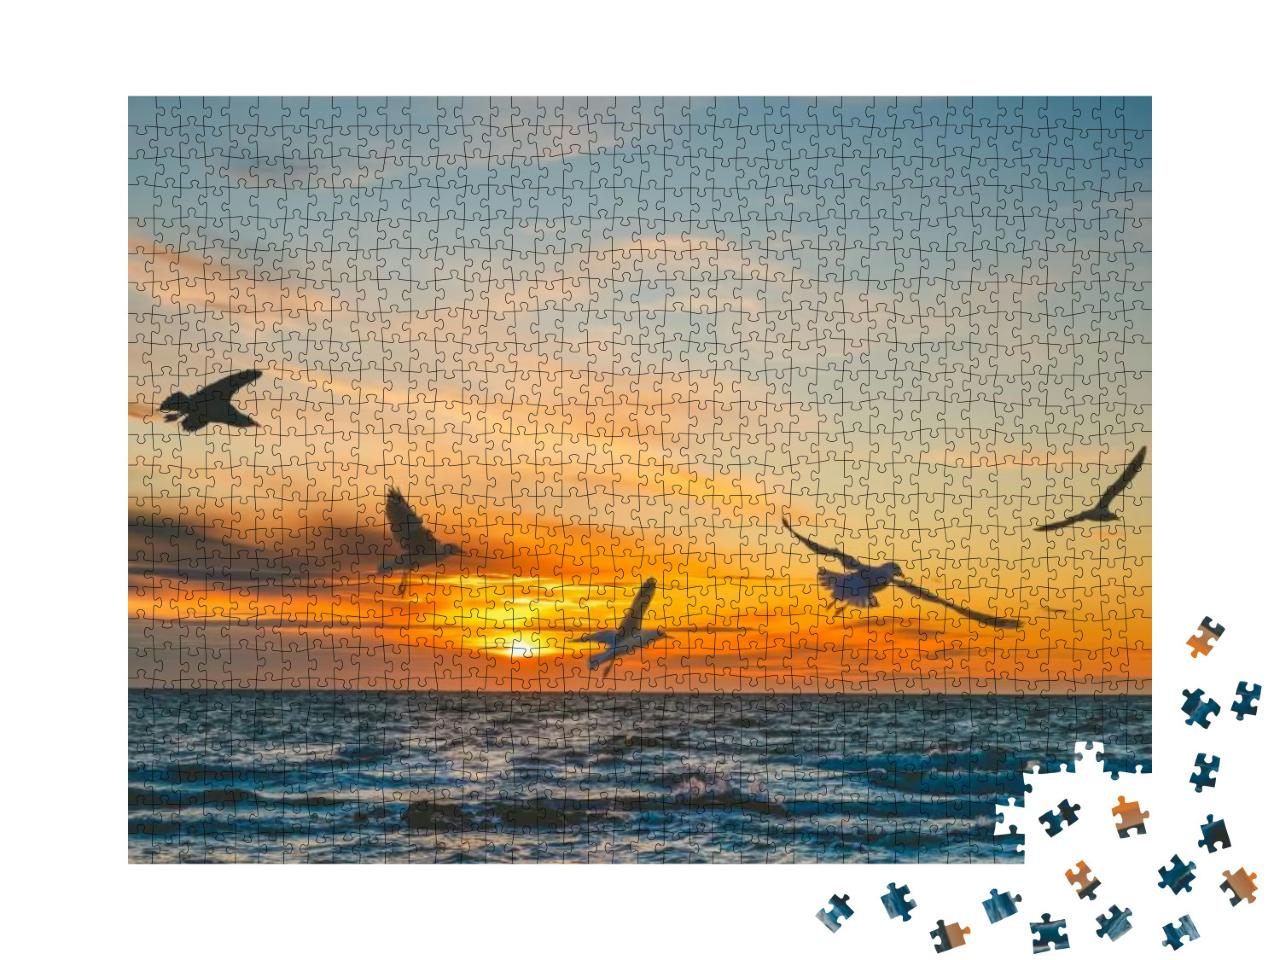 Seagulls in Flight Over Sea At Sunset - Beautiful Frozen... Jigsaw Puzzle with 1000 pieces